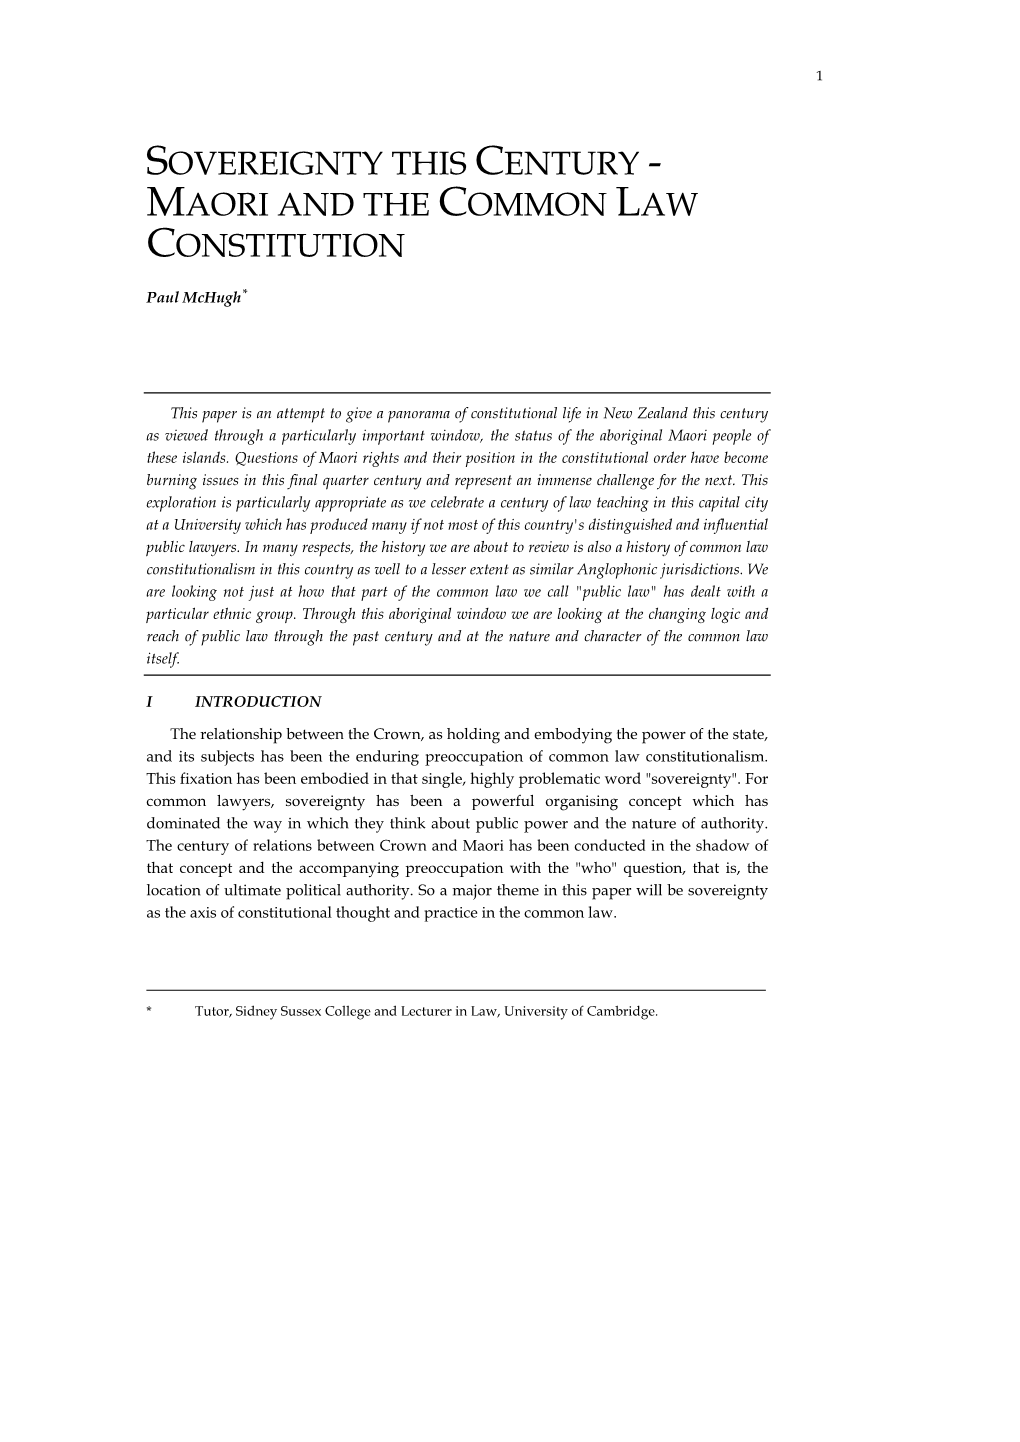 Sovereignty This Century - Maori and the Common Law Constitution